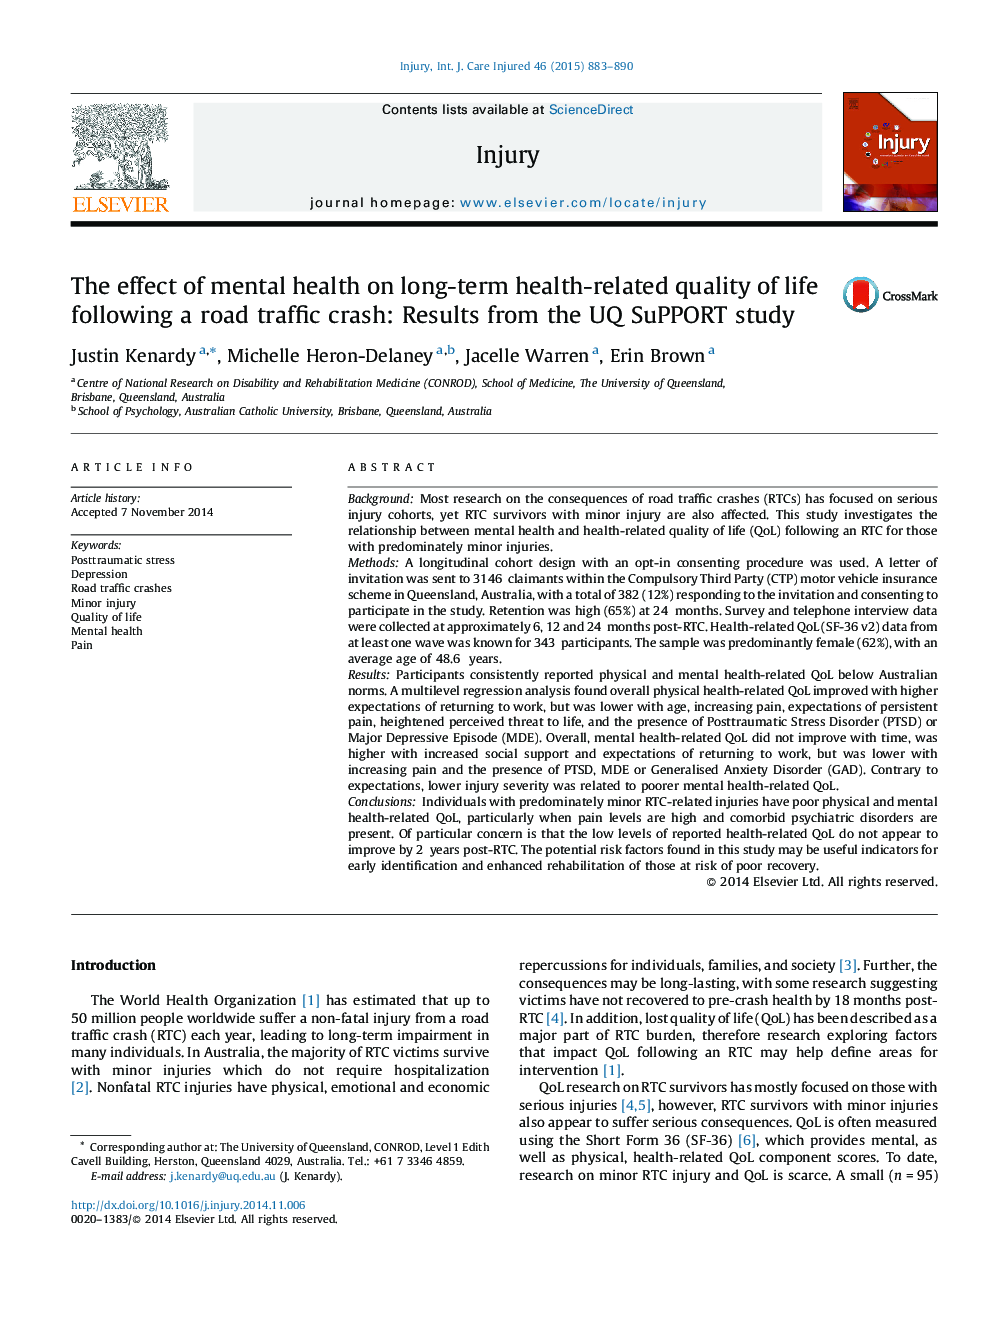 The effect of mental health on long-term health-related quality of life following a road traffic crash: Results from the UQ SuPPORT study